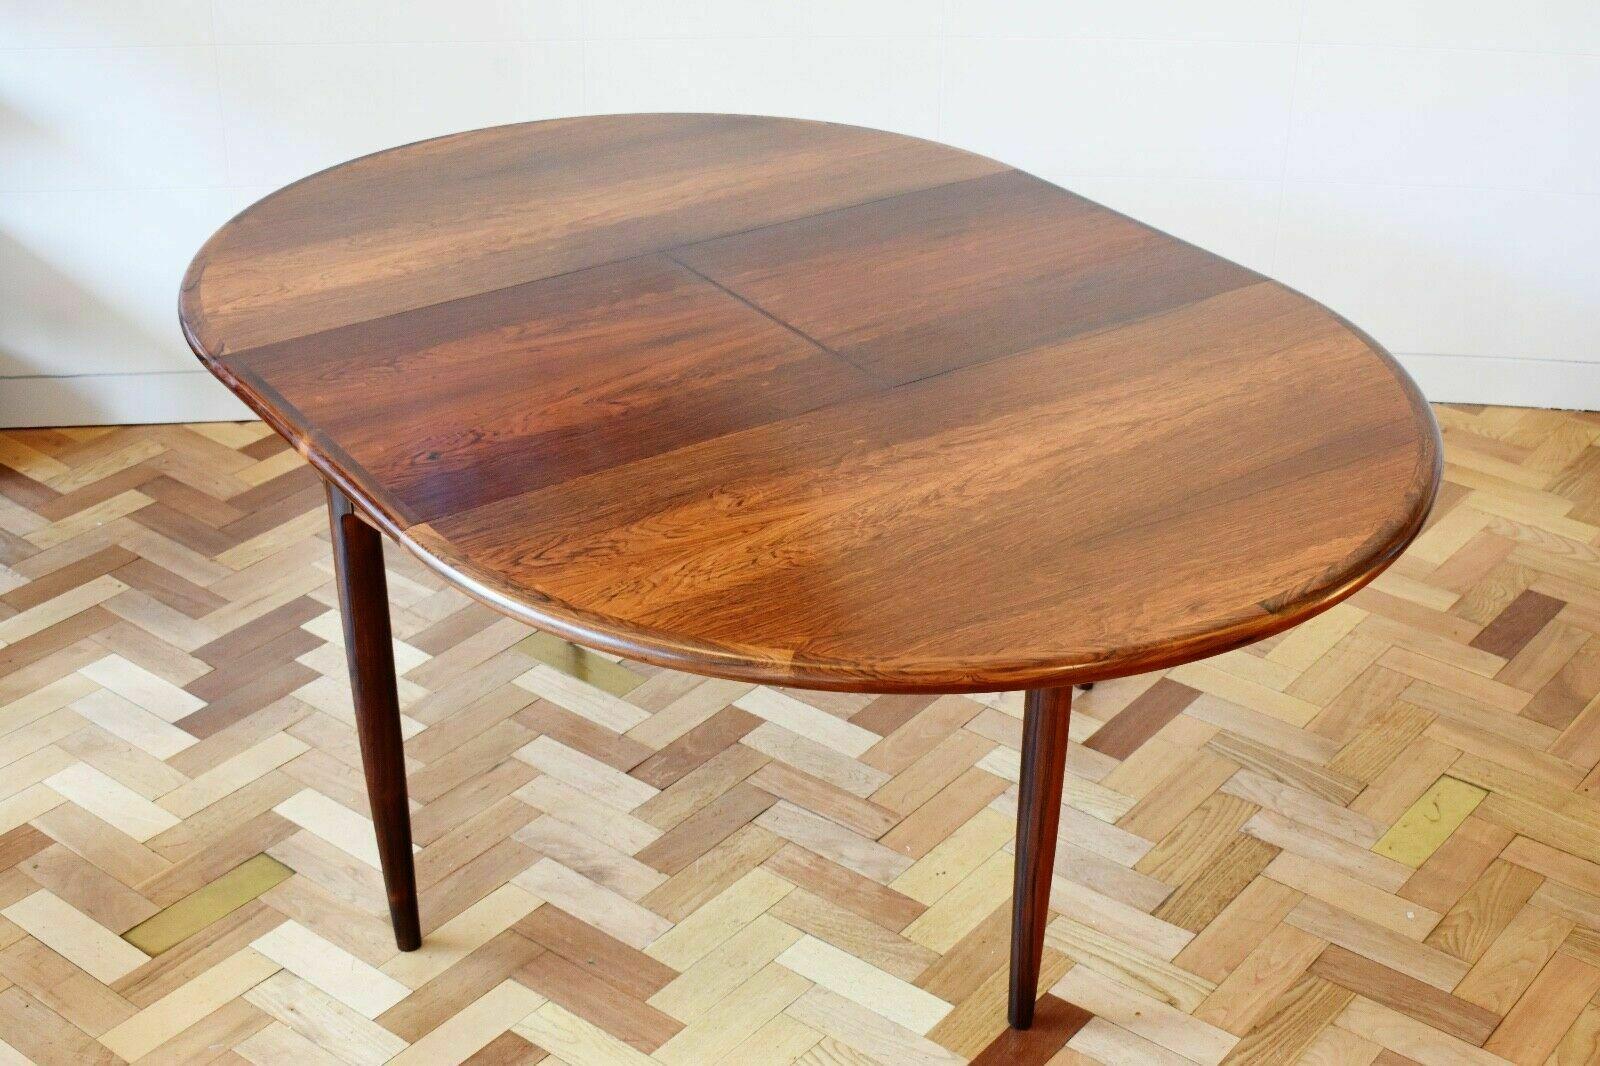 Lovely rosewood dining table designed by Niels O. Møller for J.L Møllers Møbelfabrik. This elegant piece is of great quality craftsmanship and brilliant design as indicated by the self-storing butterfly leaf, allowing for up to eight to sit around